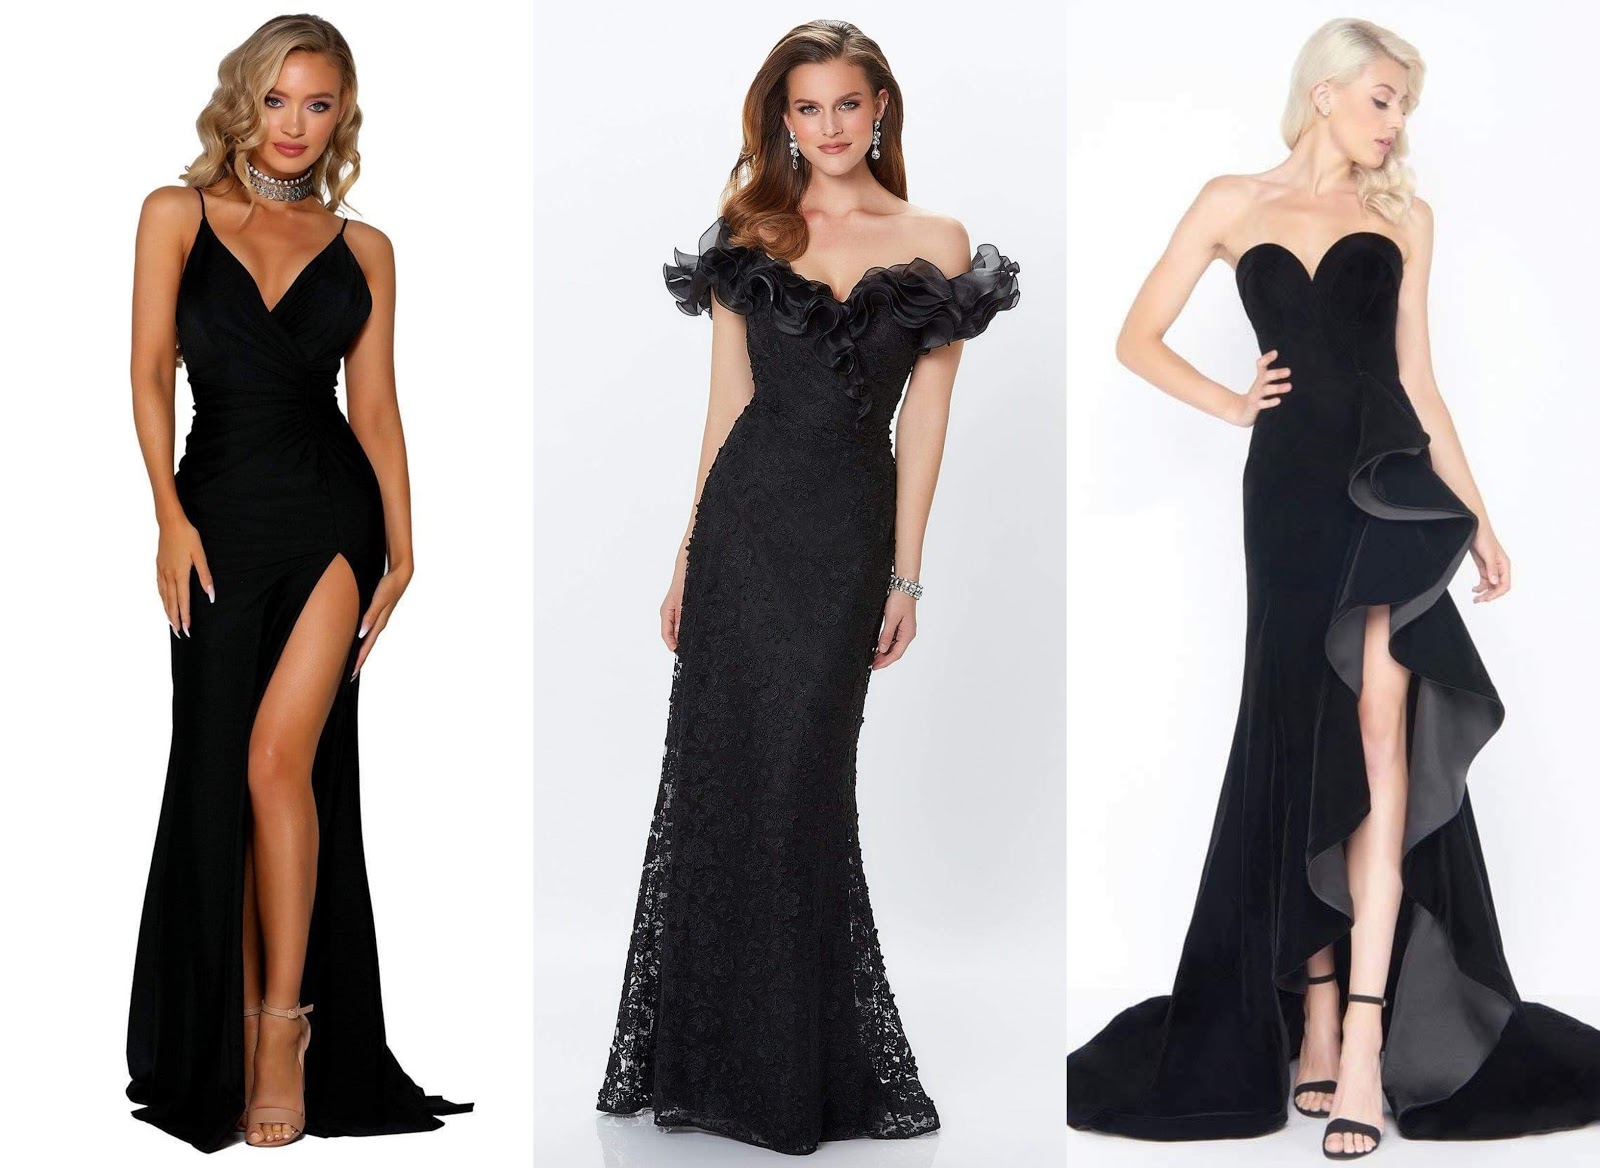 Be the fashionista of any event in beautiful black dresses! - INSCMagazine